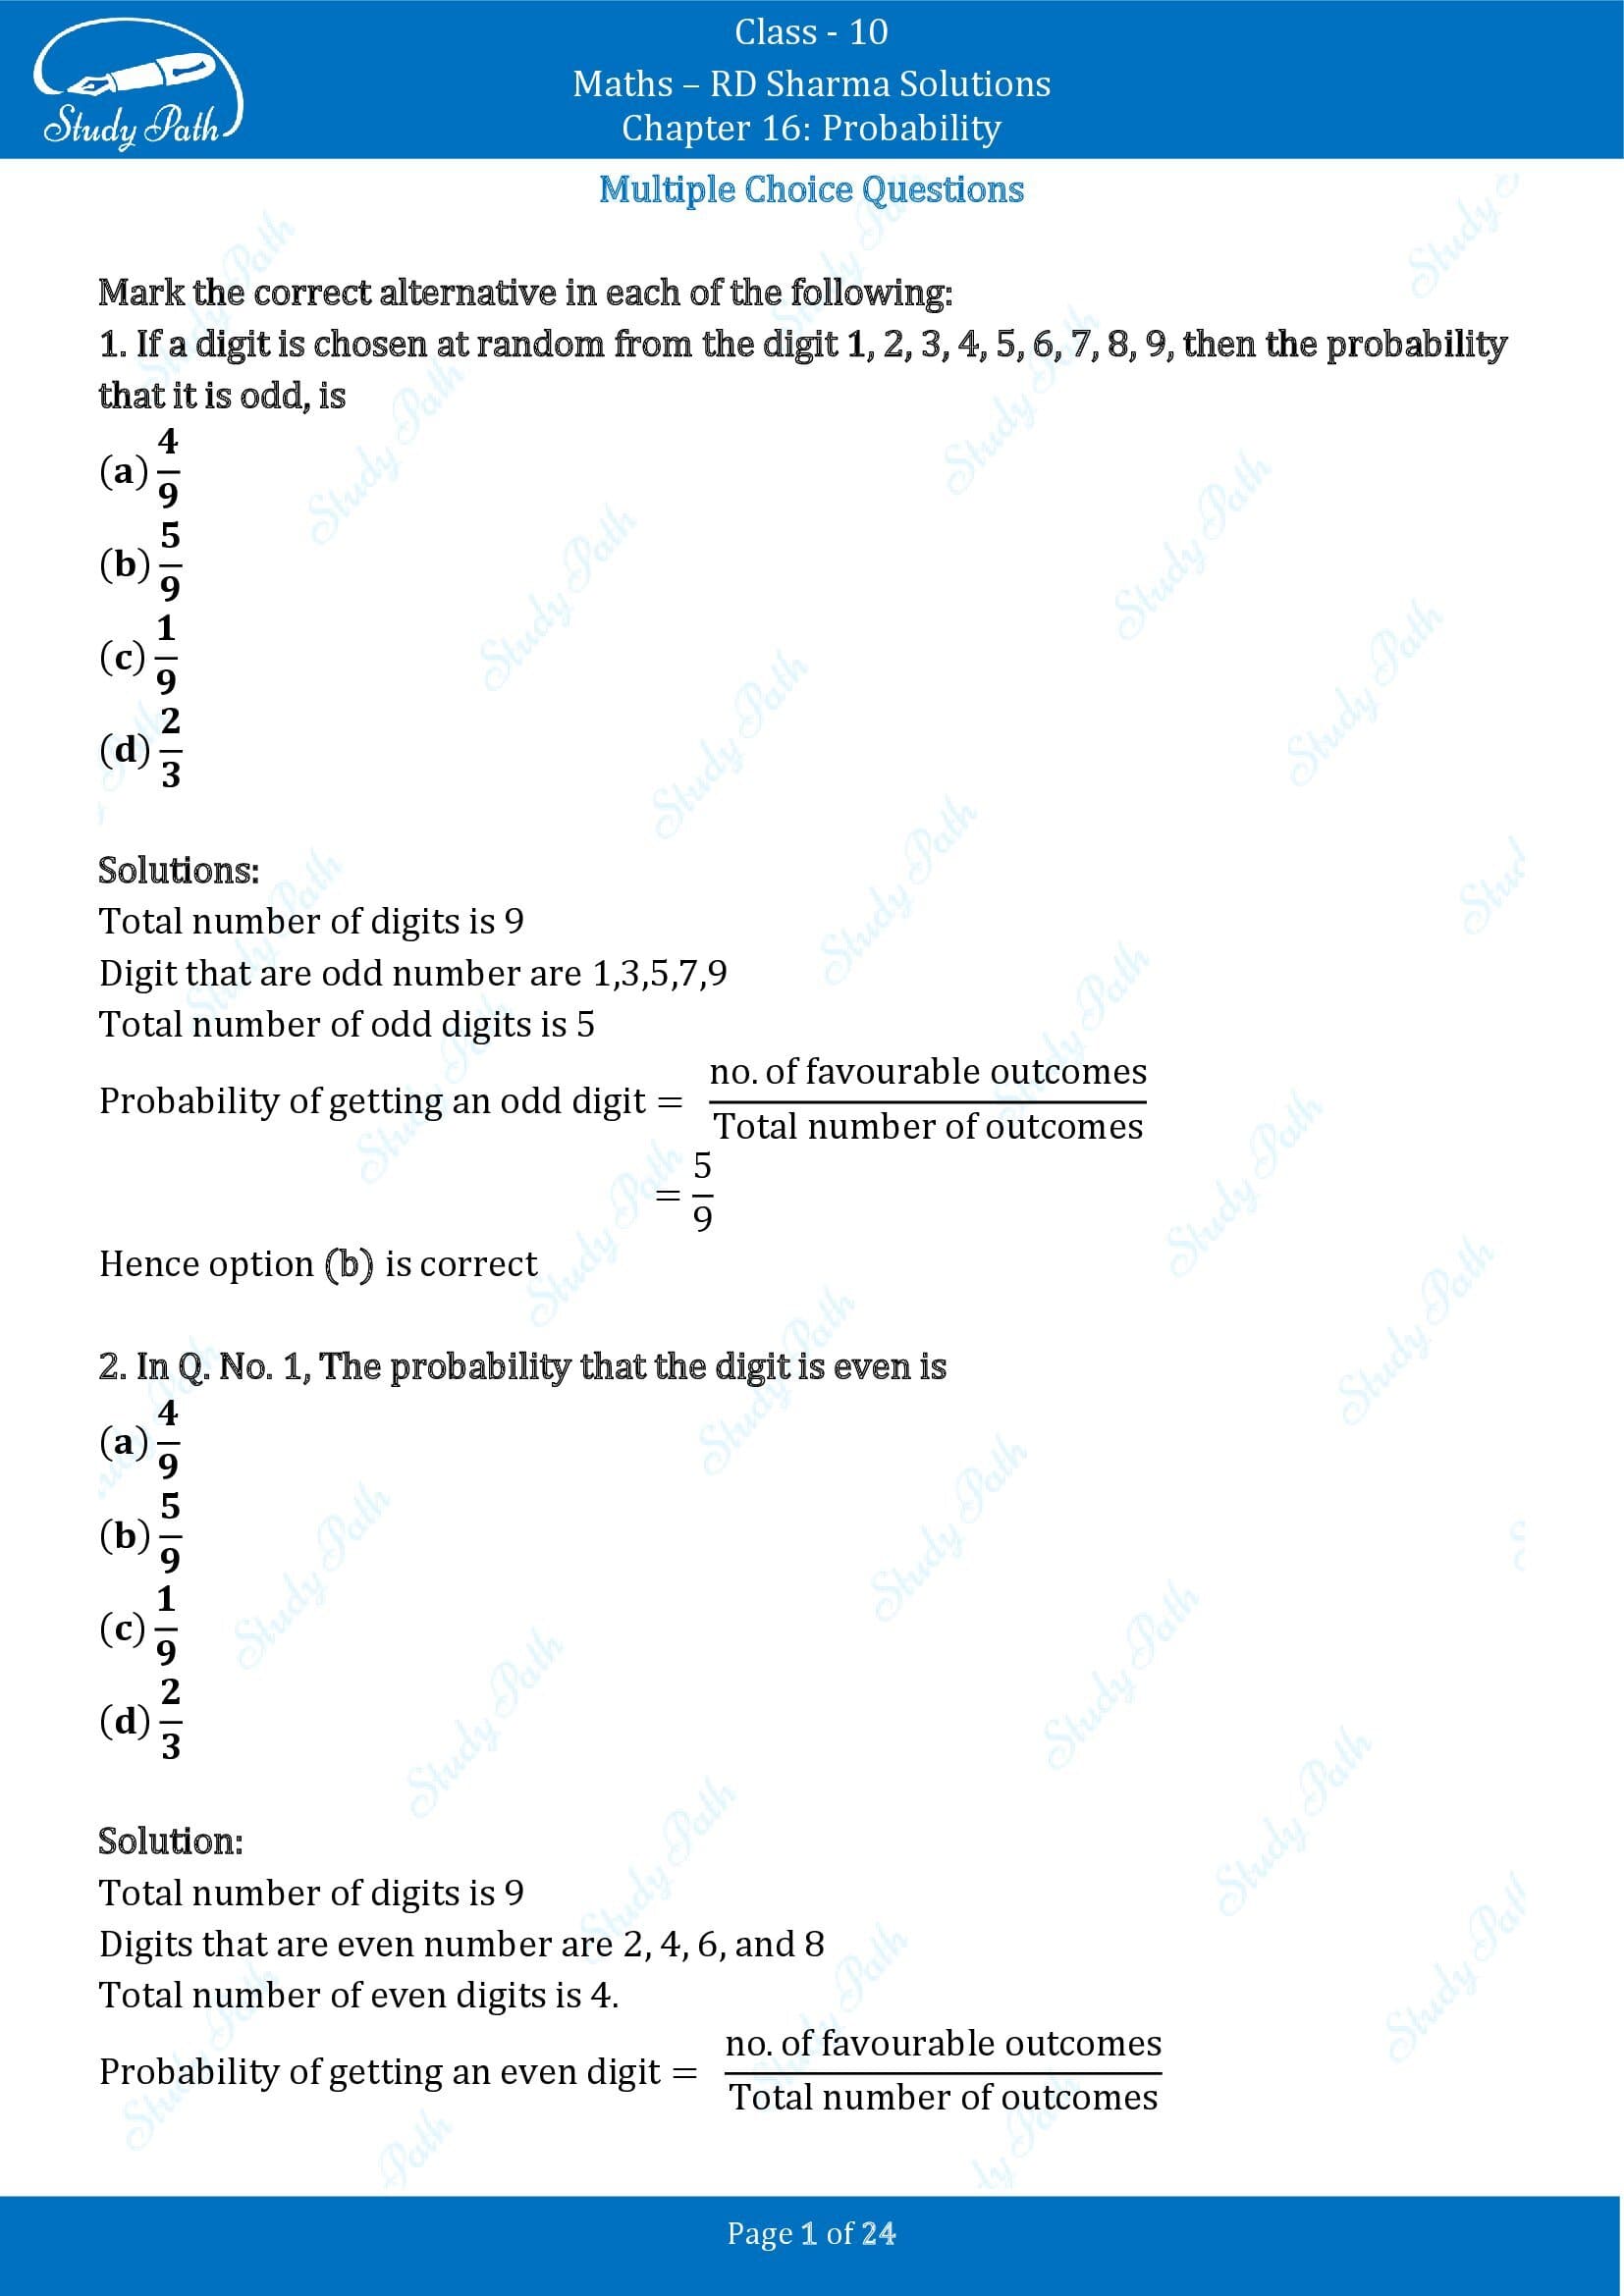 RD Sharma Solutions Class 10 Chapter 16 Probability Multiple Choice Question MCQs 00001